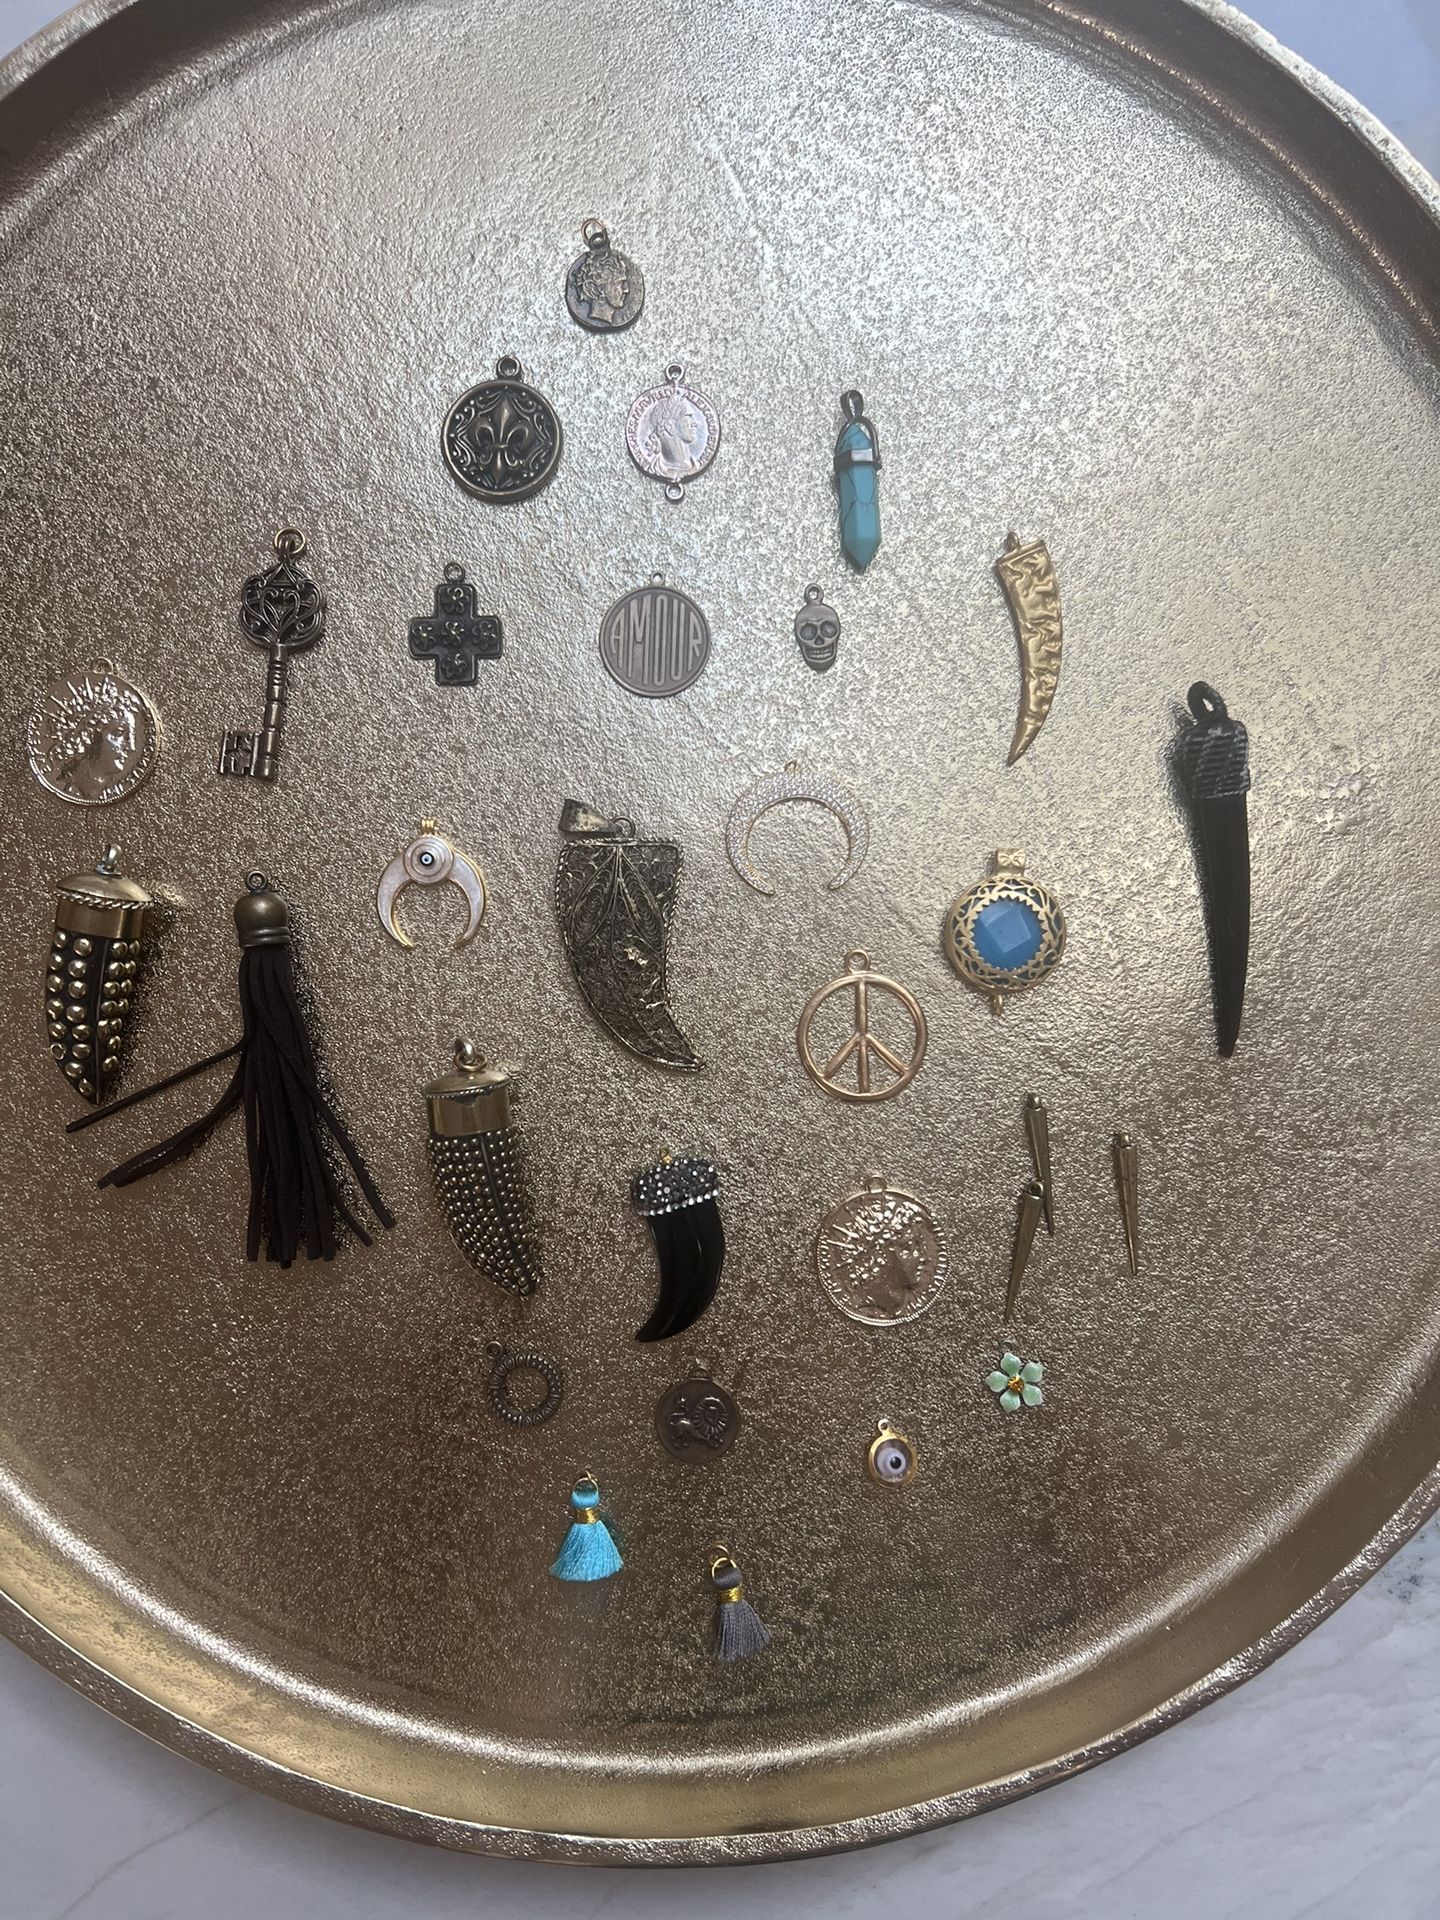 30 Of Various Of Pendant And Charms